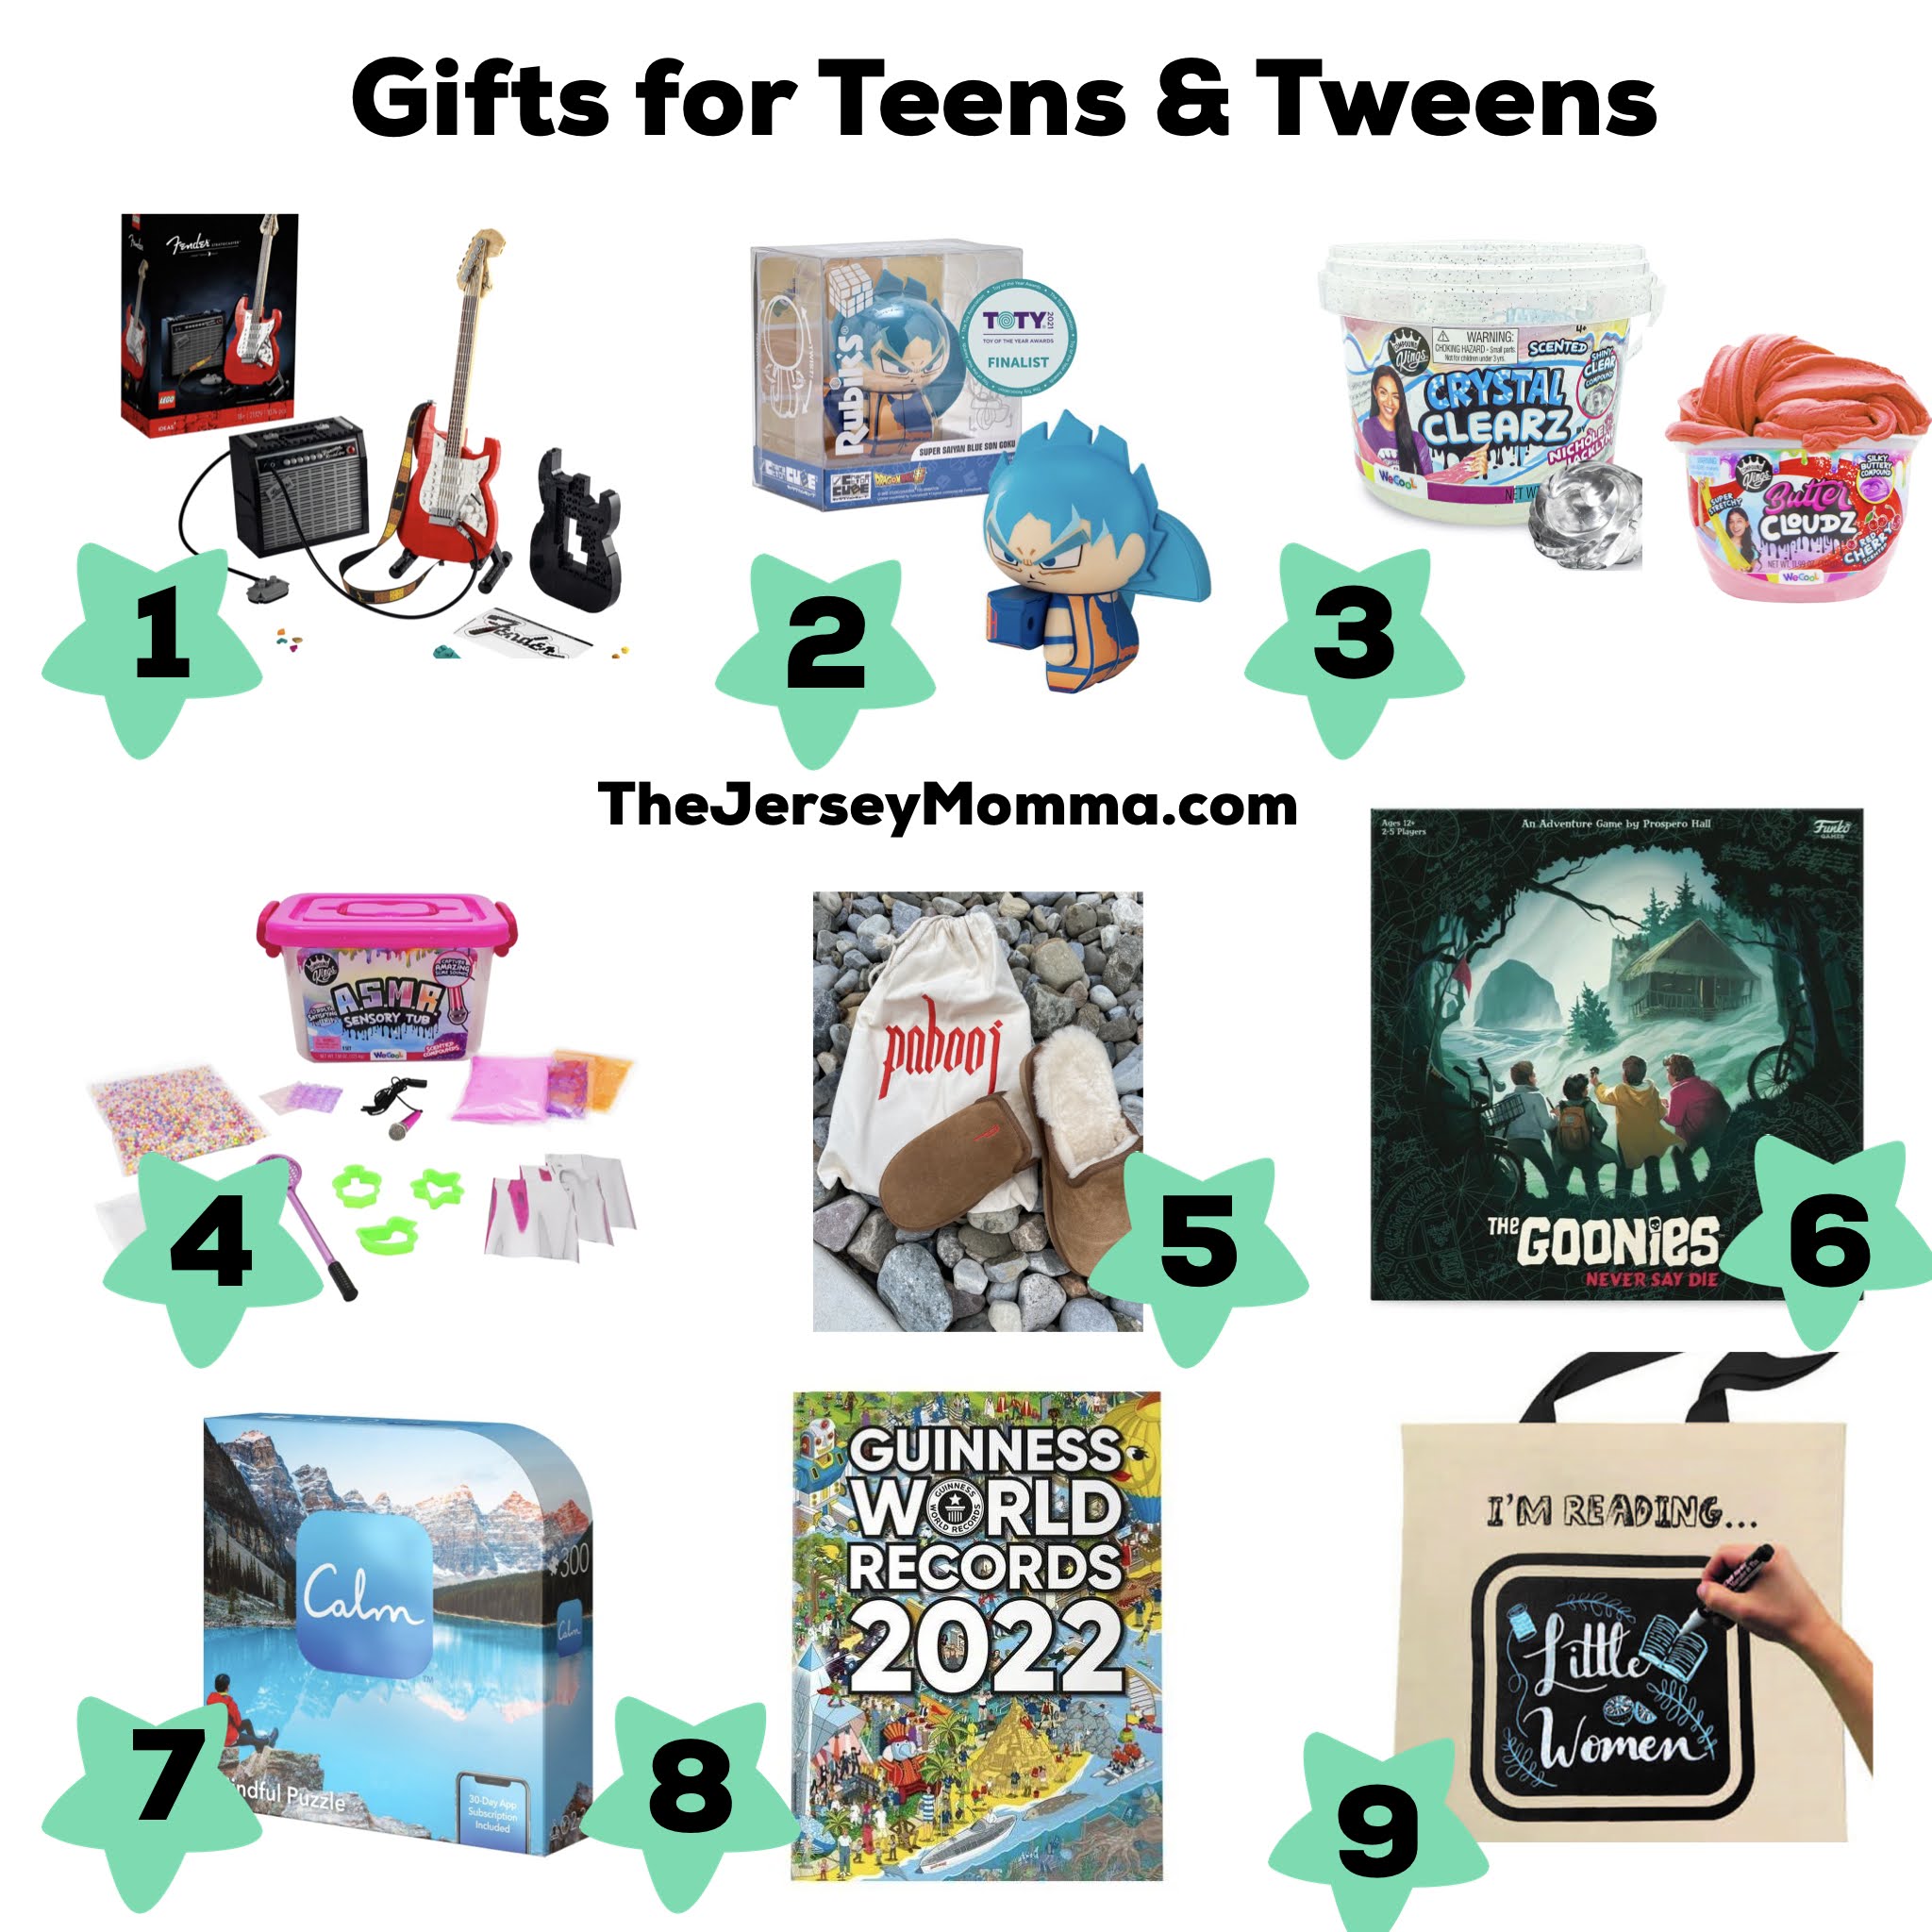 The Ultimate Holiday Gift Guide 2021: Toys, Games and Gift Ideas